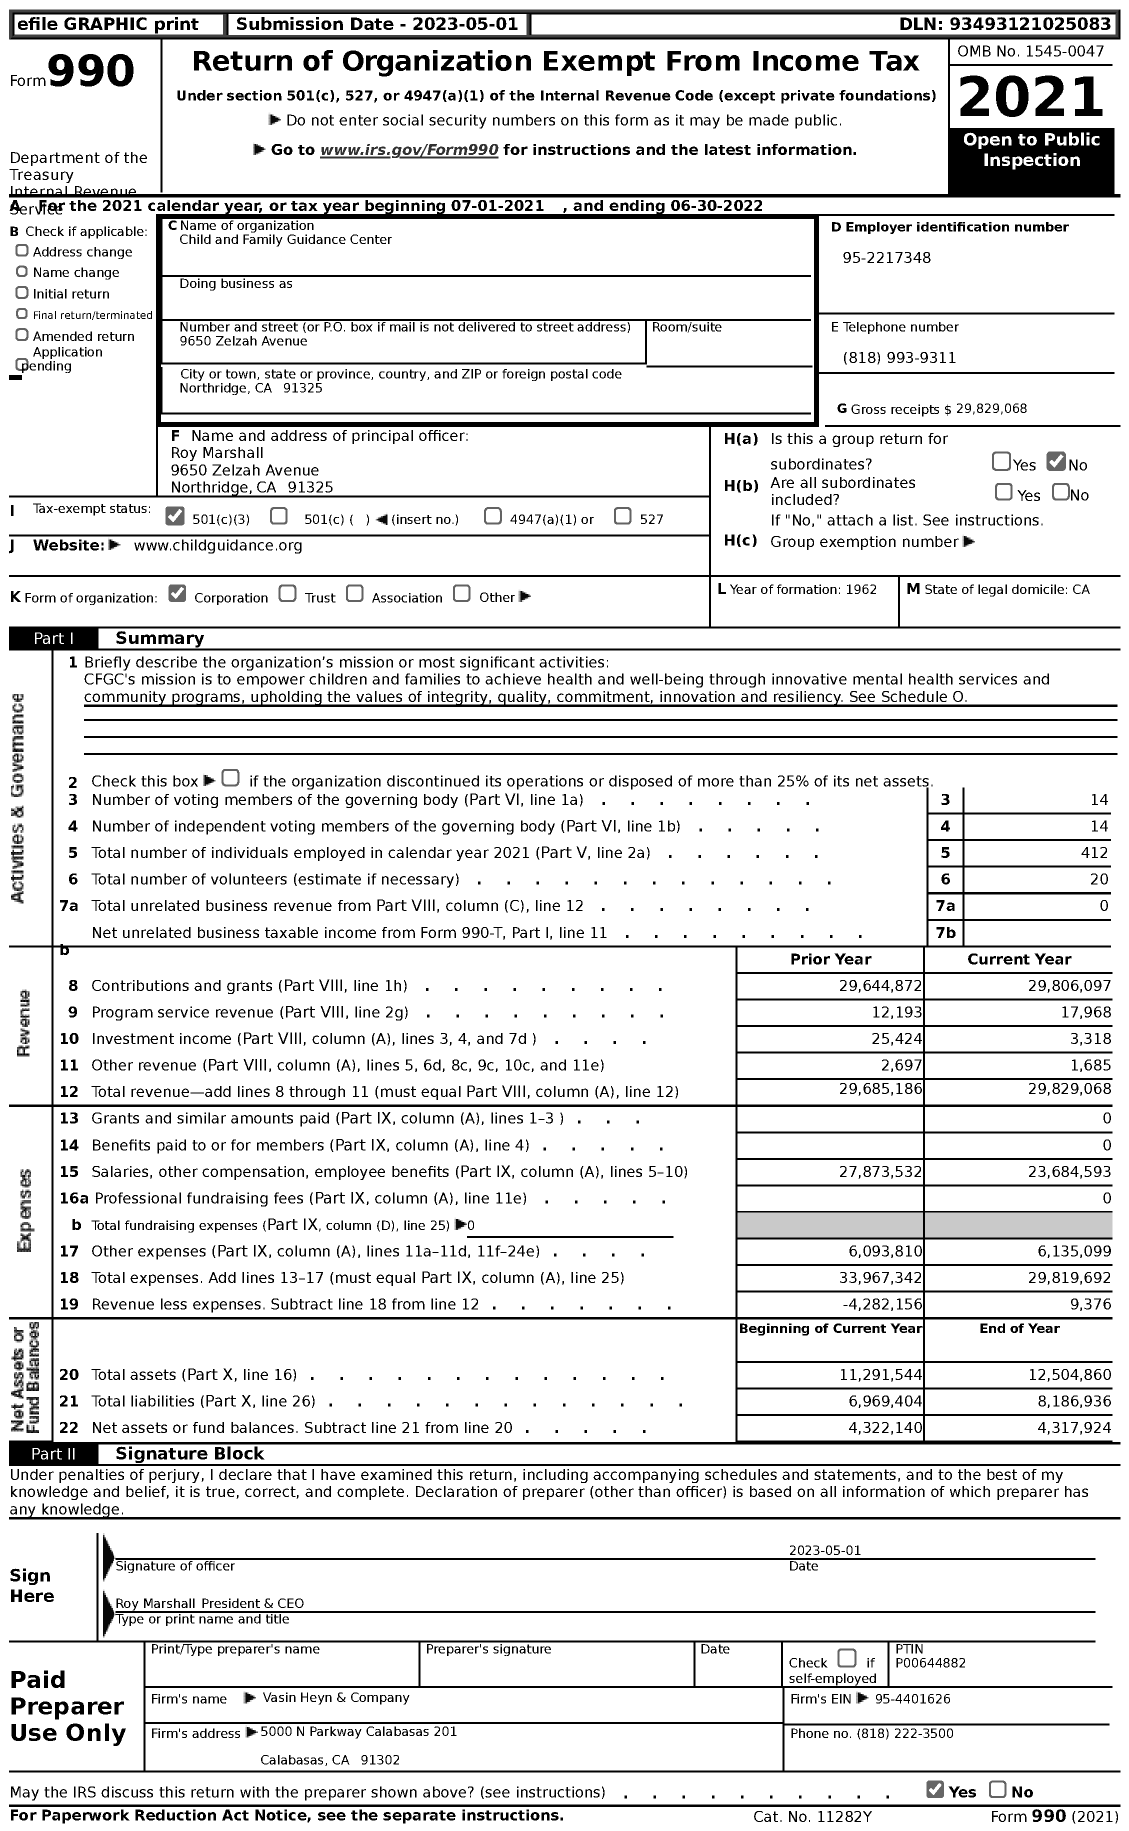 Image of first page of 2021 Form 990 for Child and Family Guidance Center (CFGC)